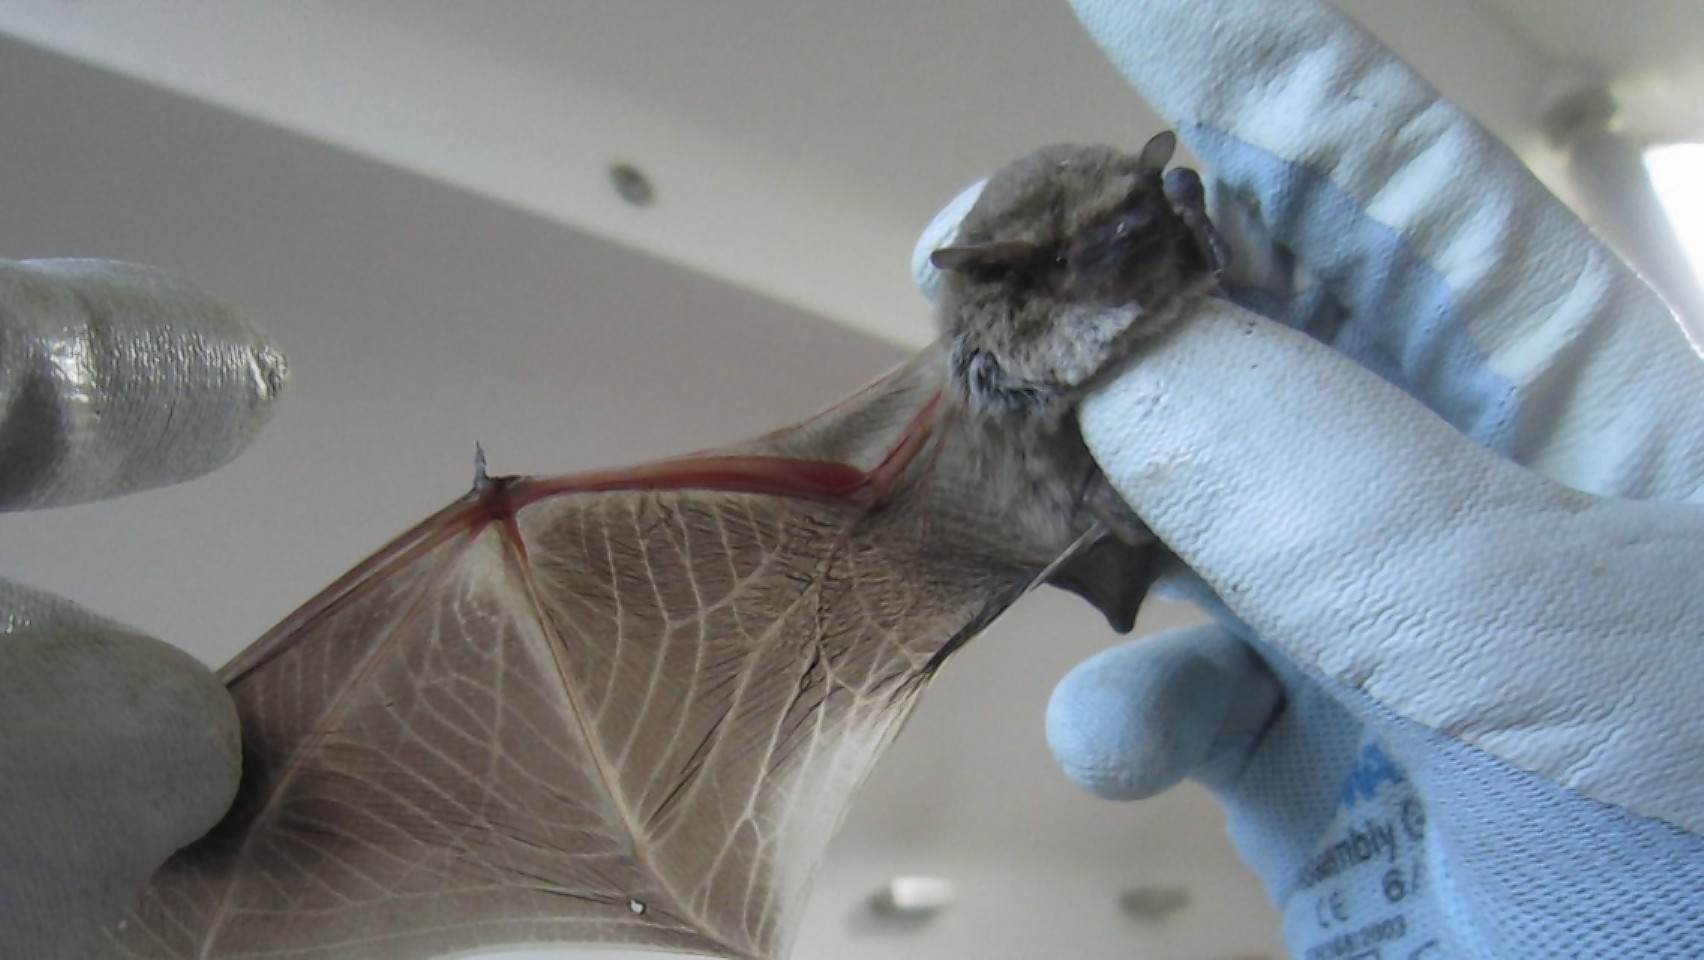 The bat made the journey from Romania to the north-east